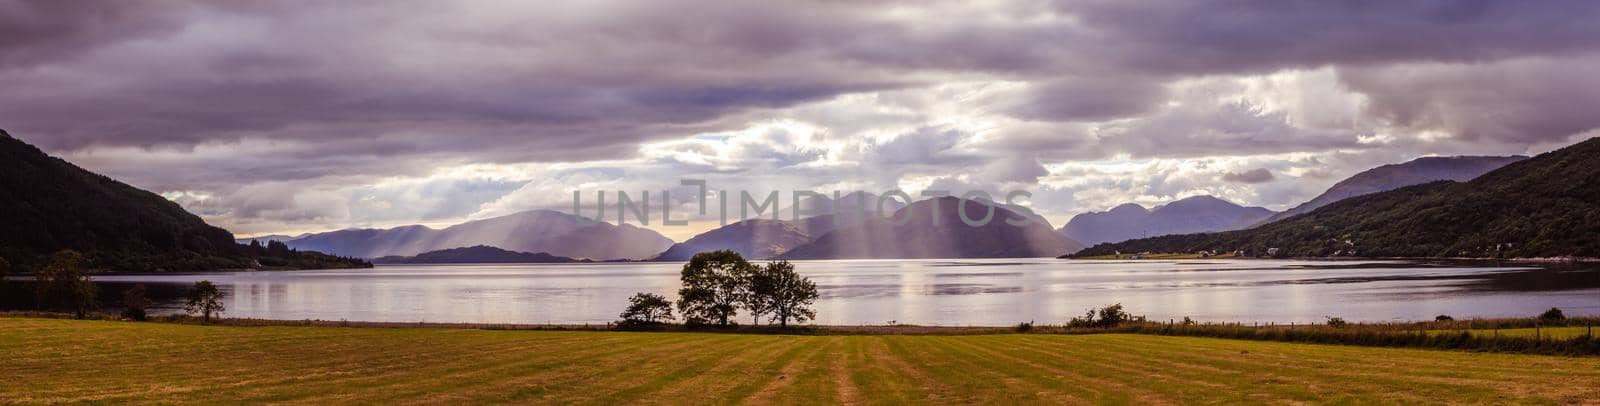 Mystic landscape lake scenery in Scotland: Cloudy sky, meadow, trees and lake with sunbeams, mountain range in the background. Loch Linnhe. by Daxenbichler